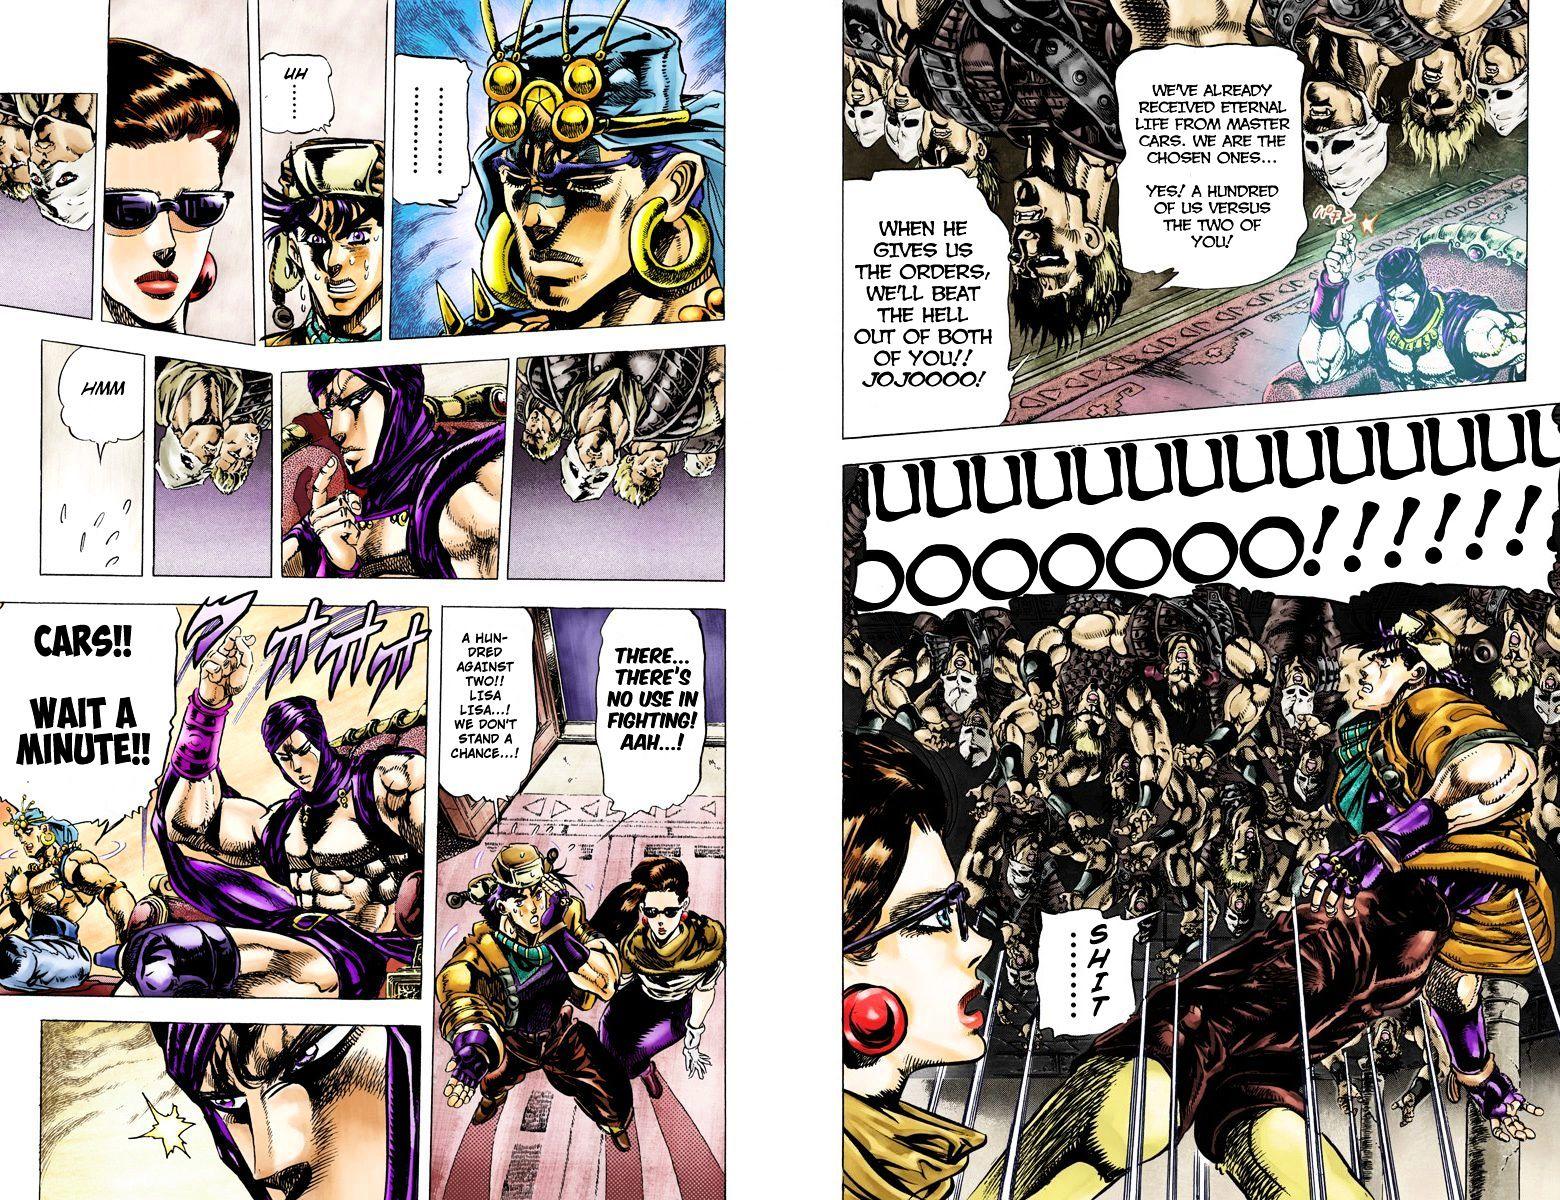 Jojo's Bizarre Adventure Vol.10 Chapter 95 : The One Hundred Vs Two Strategy (Official Color Scans) page 6 - 